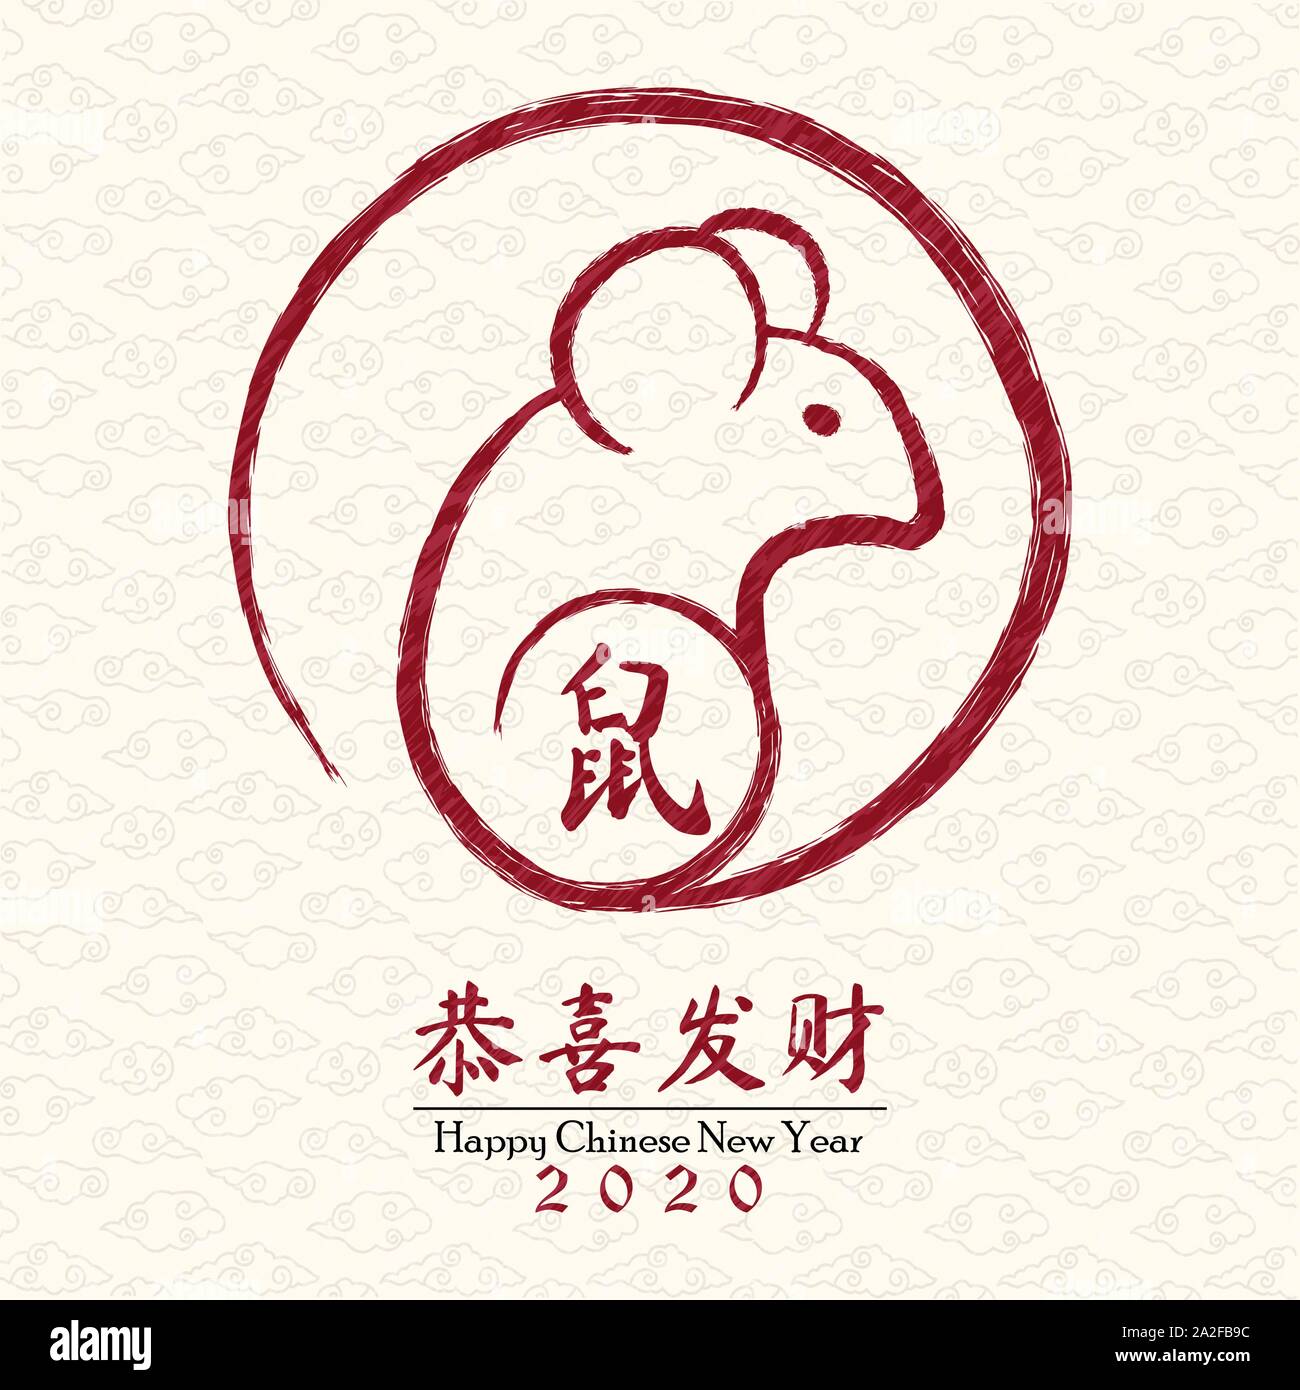 Happy Chinese New year 2020 traditional greeting card of red mouse in hand drawn asian art style. Calligraphy translation: rat, prosperity wishes. Stock Vector